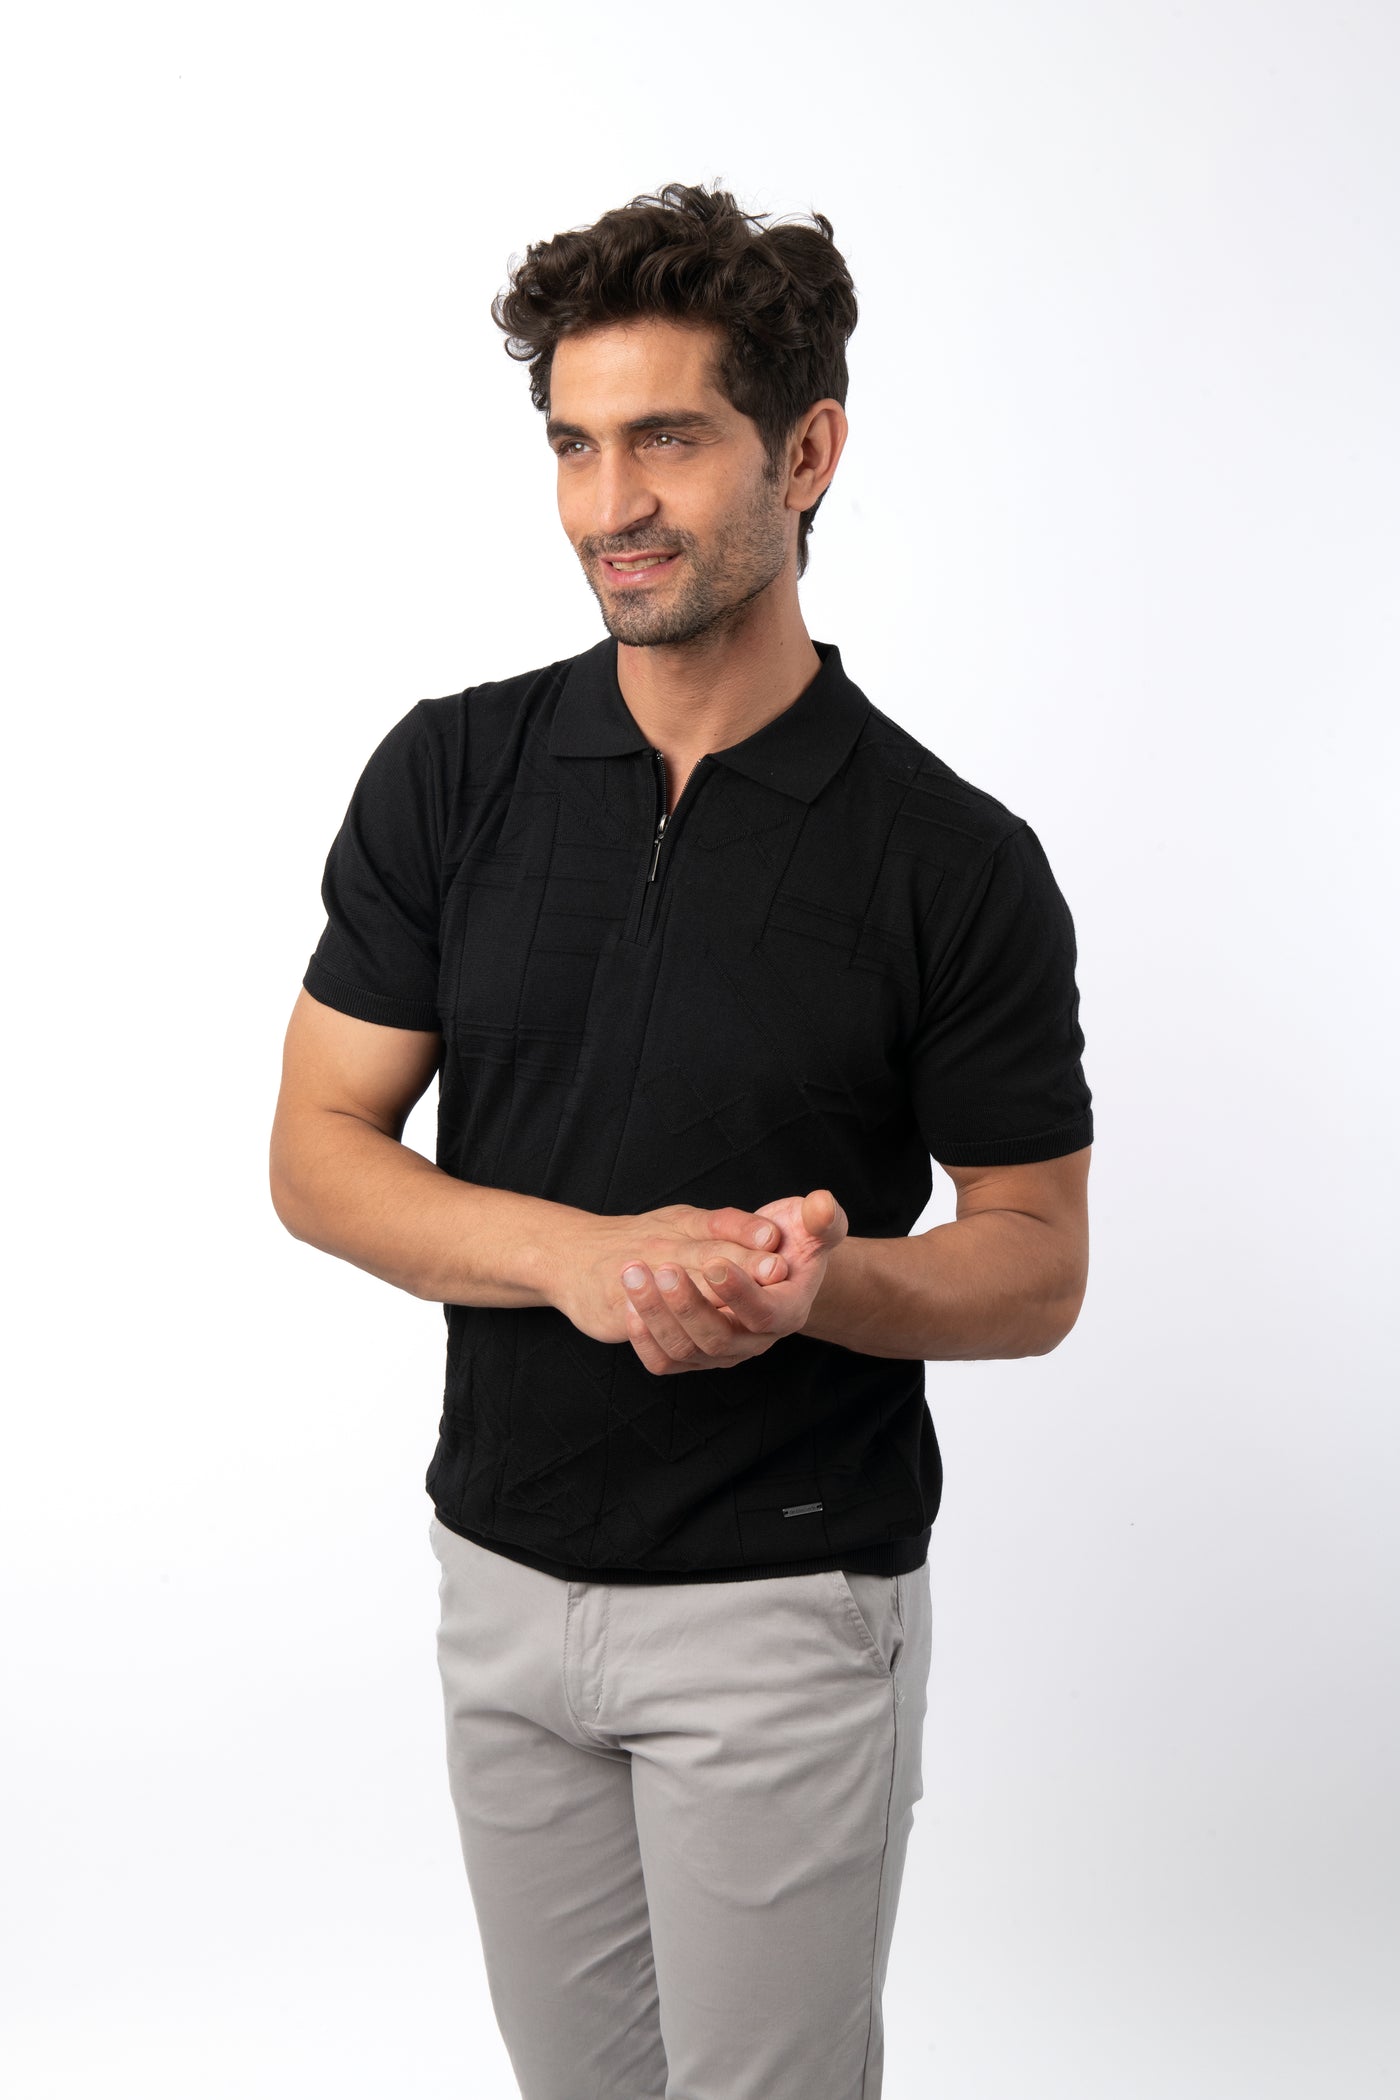 Knitted Jacquard Black Cotton Polo